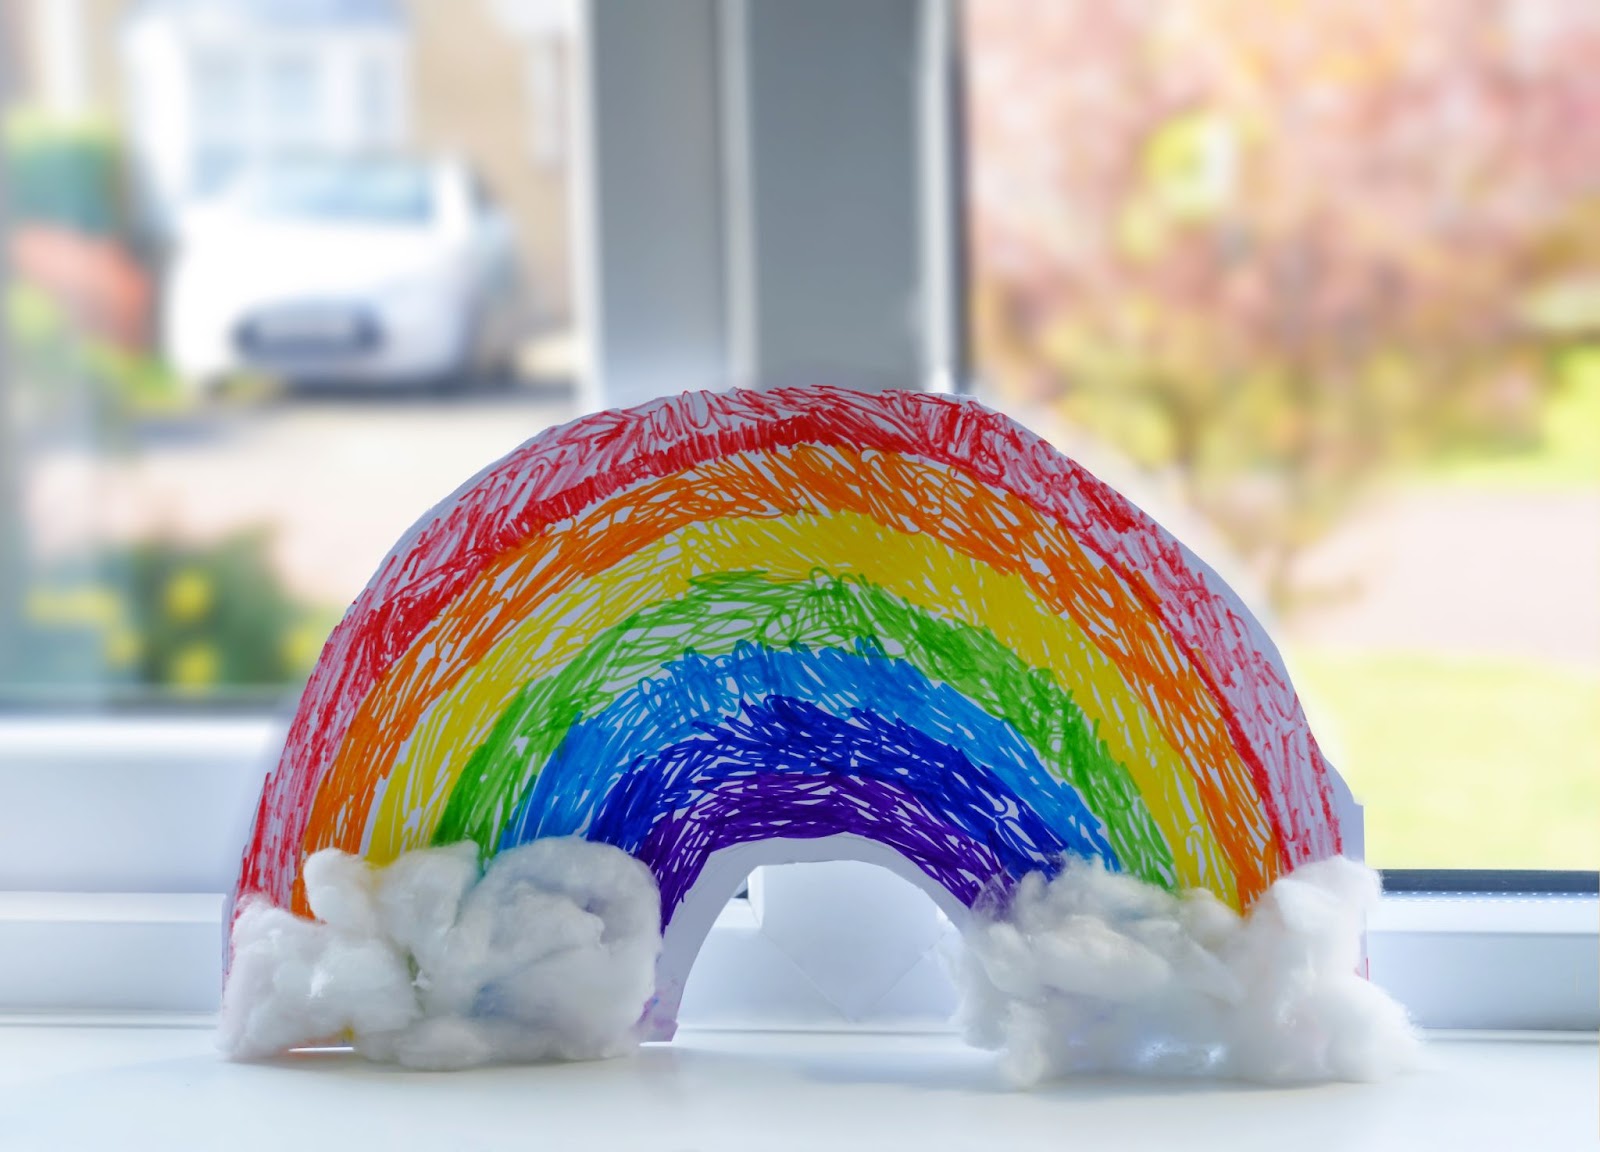 How-to Craft a What Makes a Rainbow? Inspired Tissue Paper Rainbow